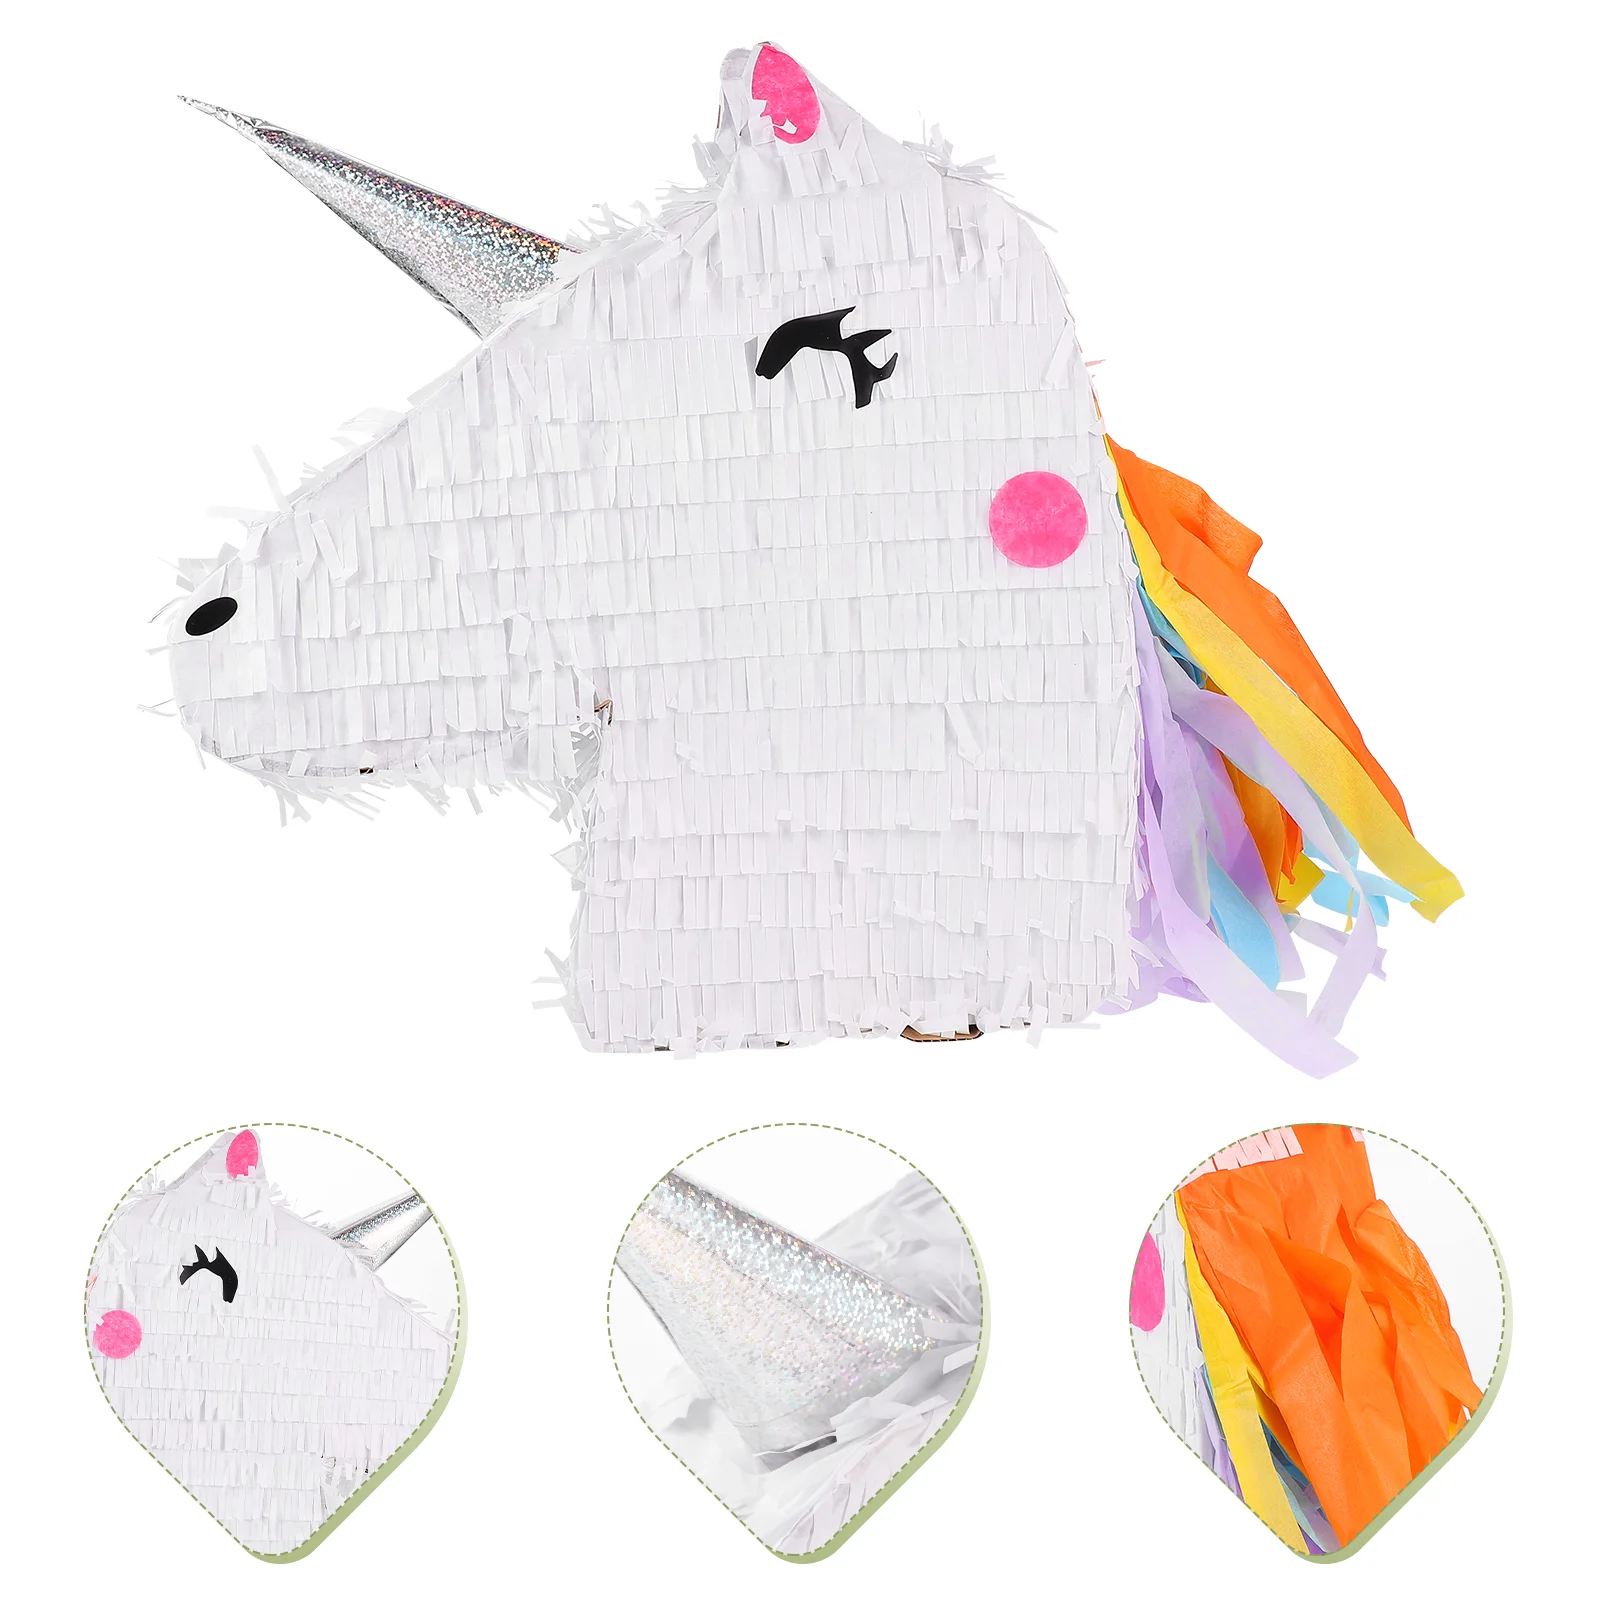 

Little Stars Summer Candy Birthday Plaything The Party Toy Decor Unicorn Design Paper Container Pinata Child Sugar Filled